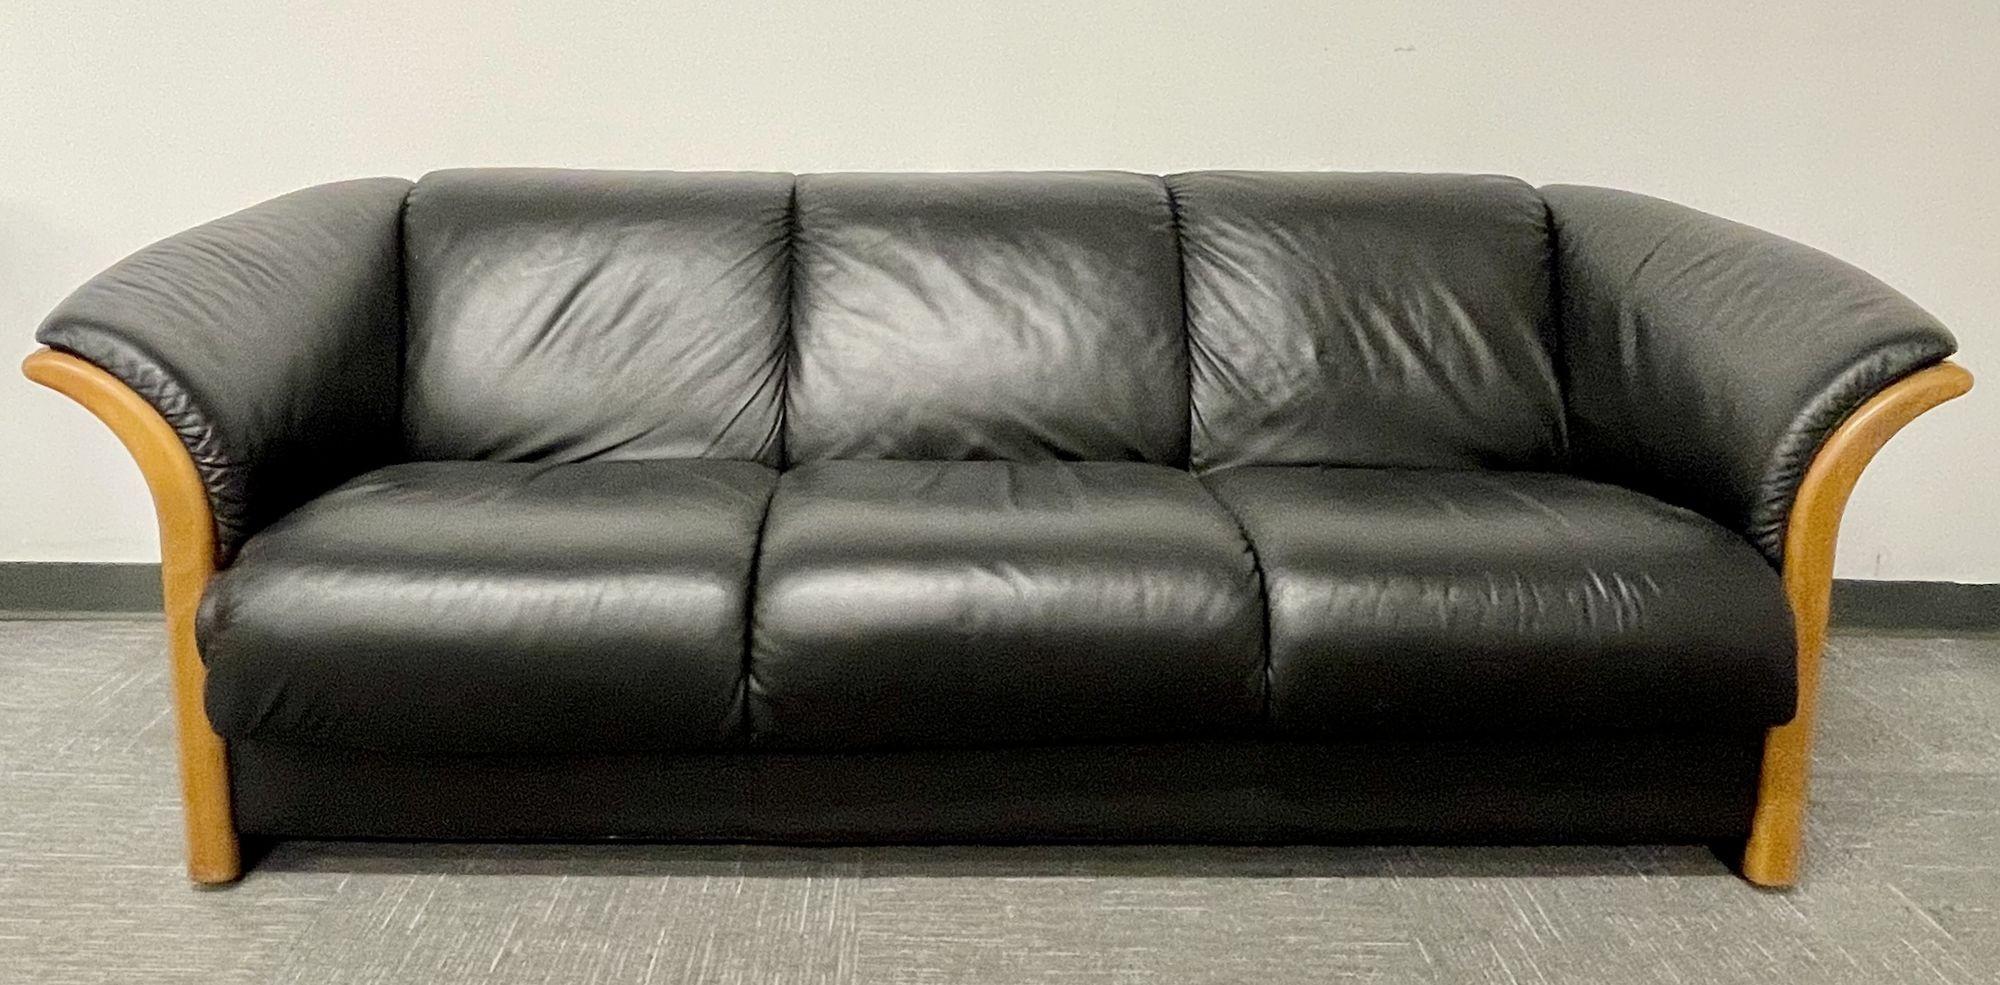 leather couch with wood trim